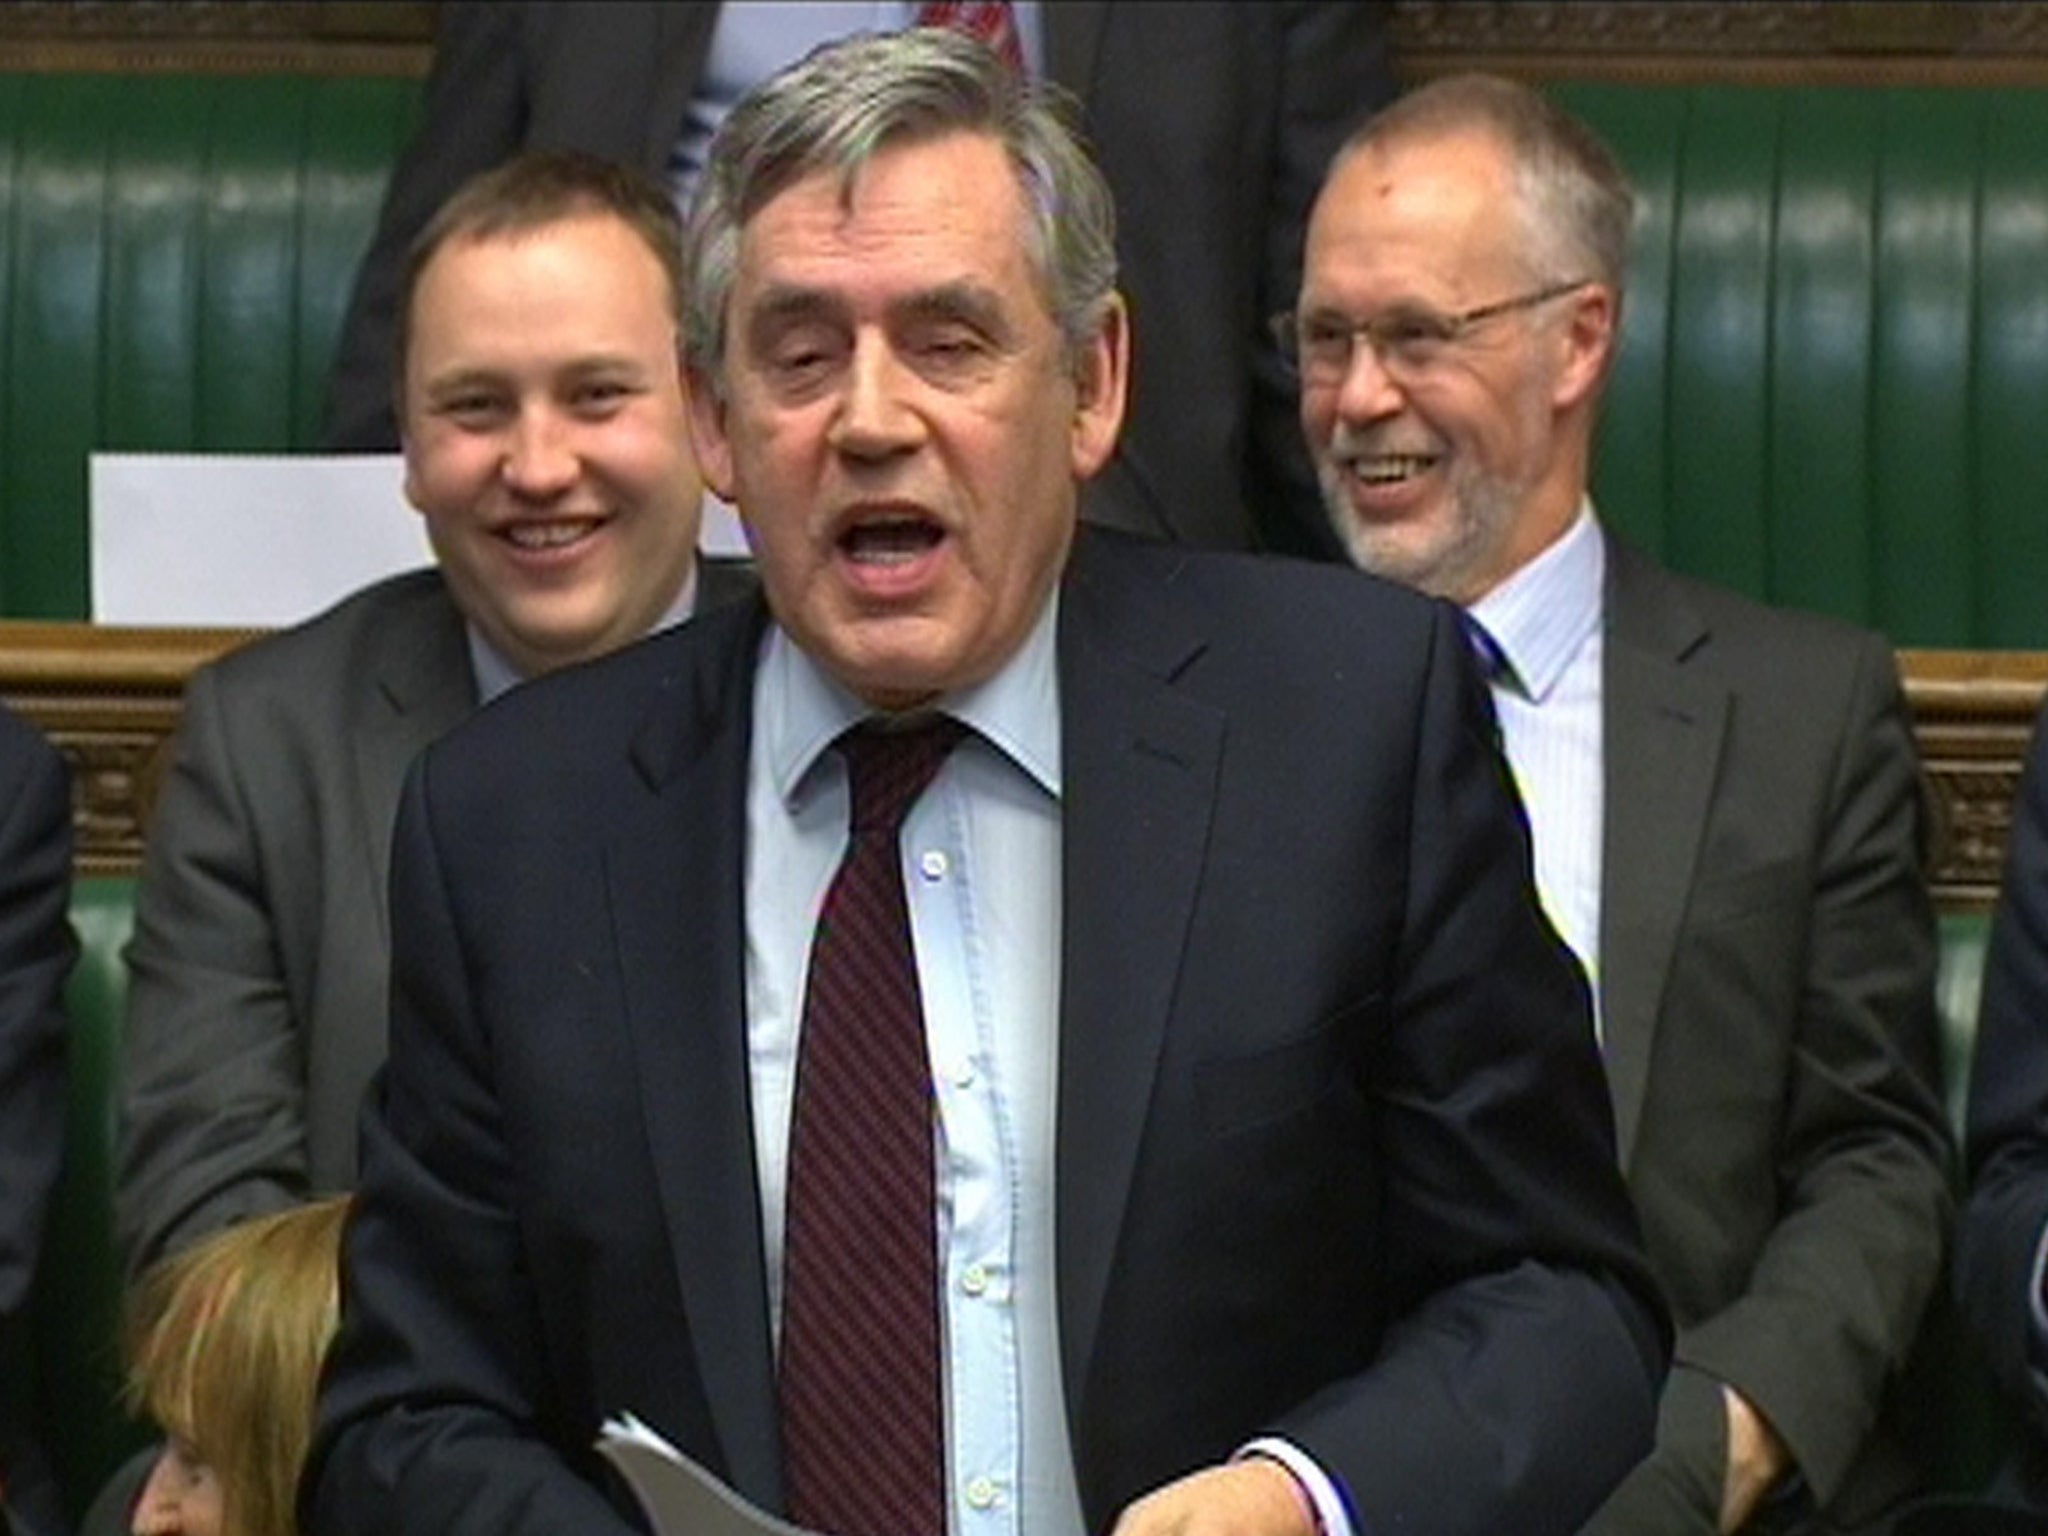 Gordon Brown was Prime Minister between 2007 and 2010